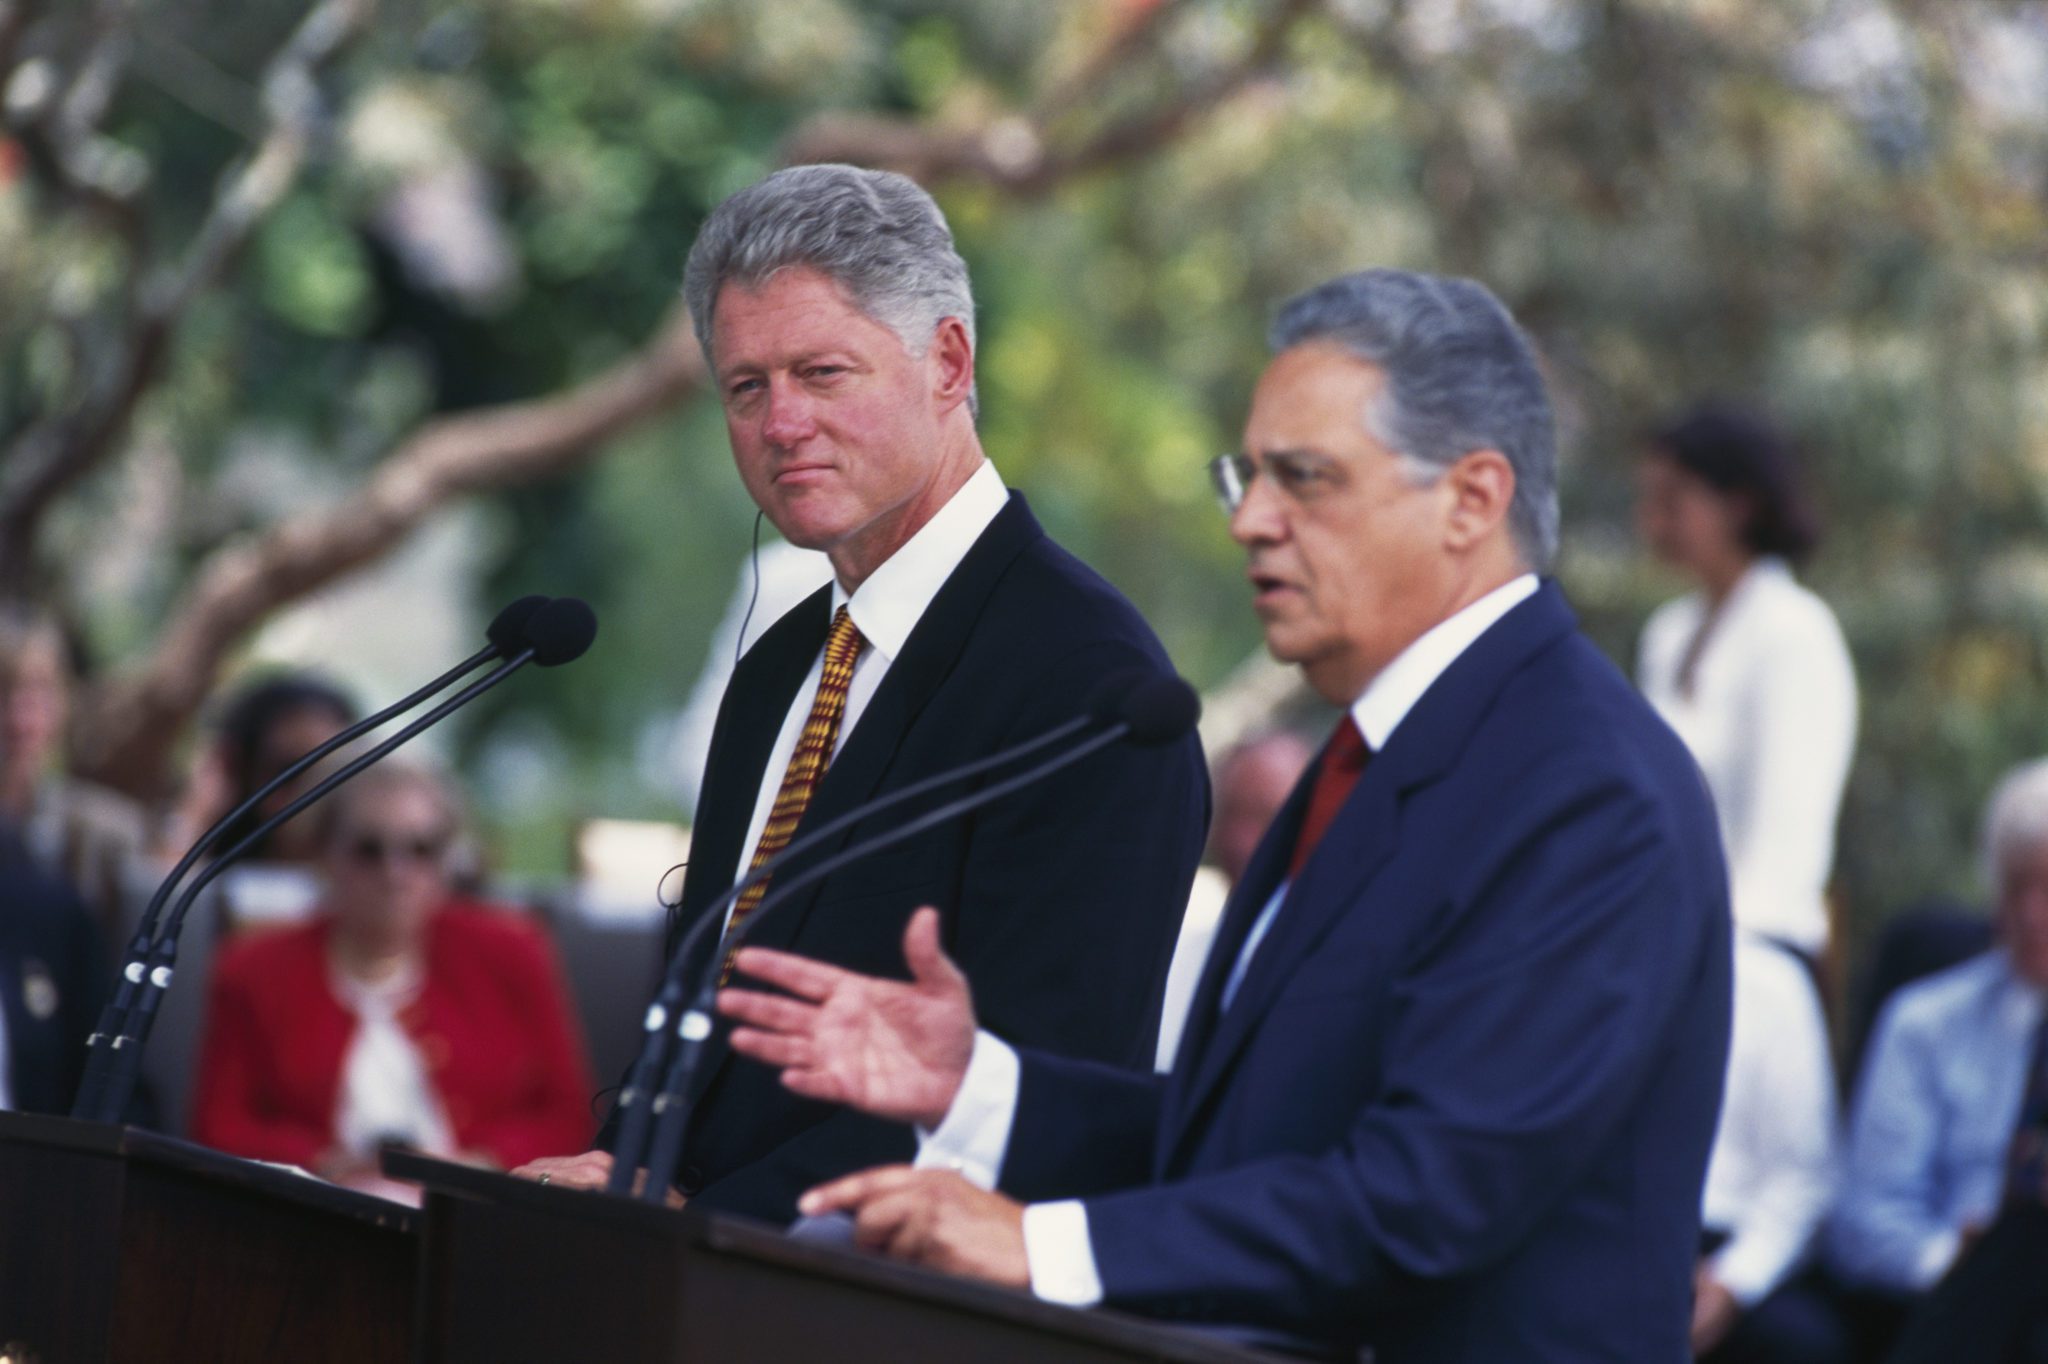 Official Visit of Bill Clinton to Brazil